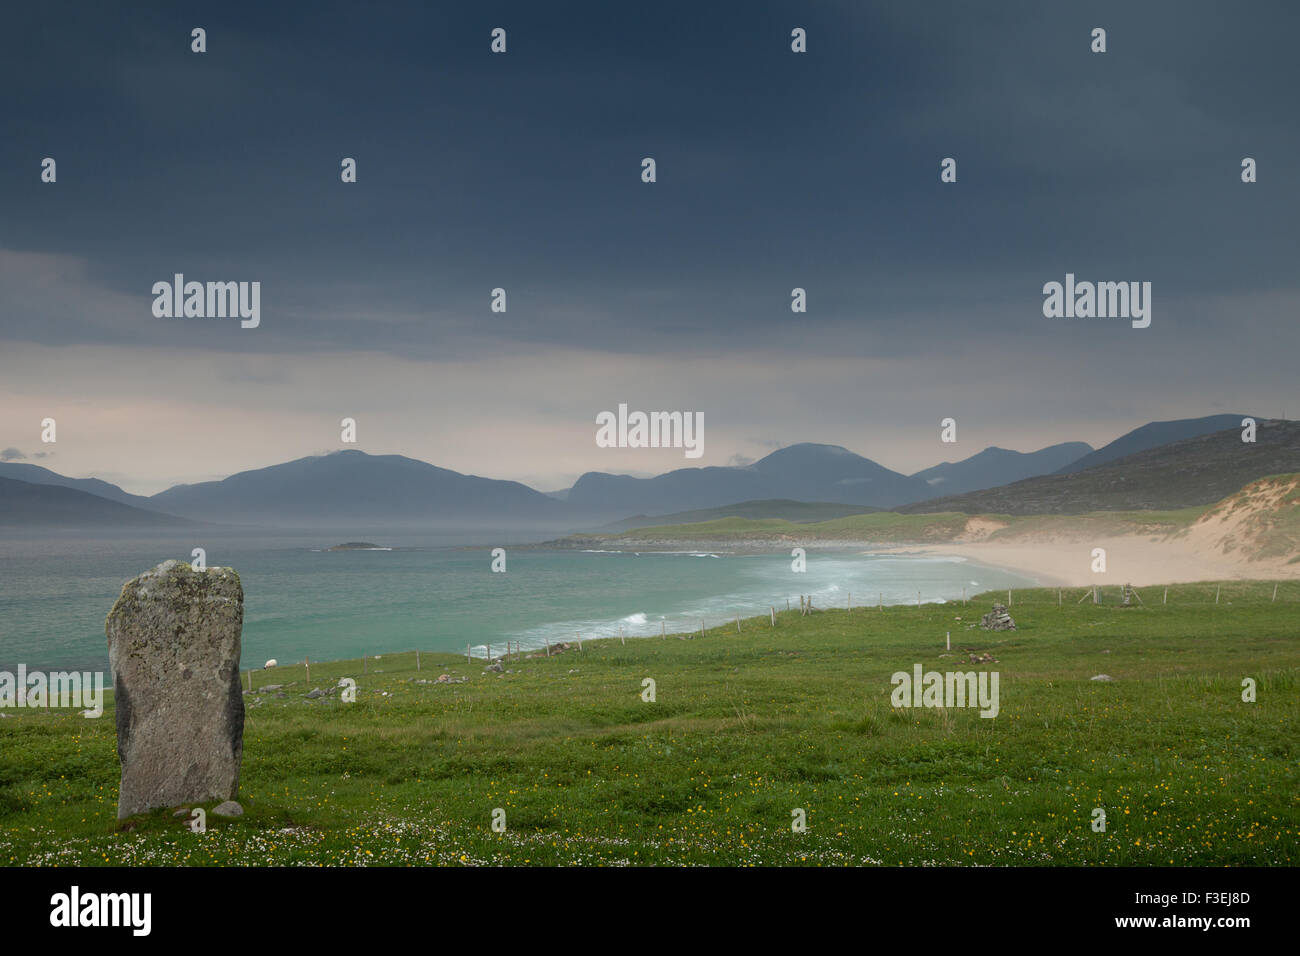 The Single standing stone Clach Steineagaidh, Isle of Harris, Outer Hebrides, Scotland. Stock Photo